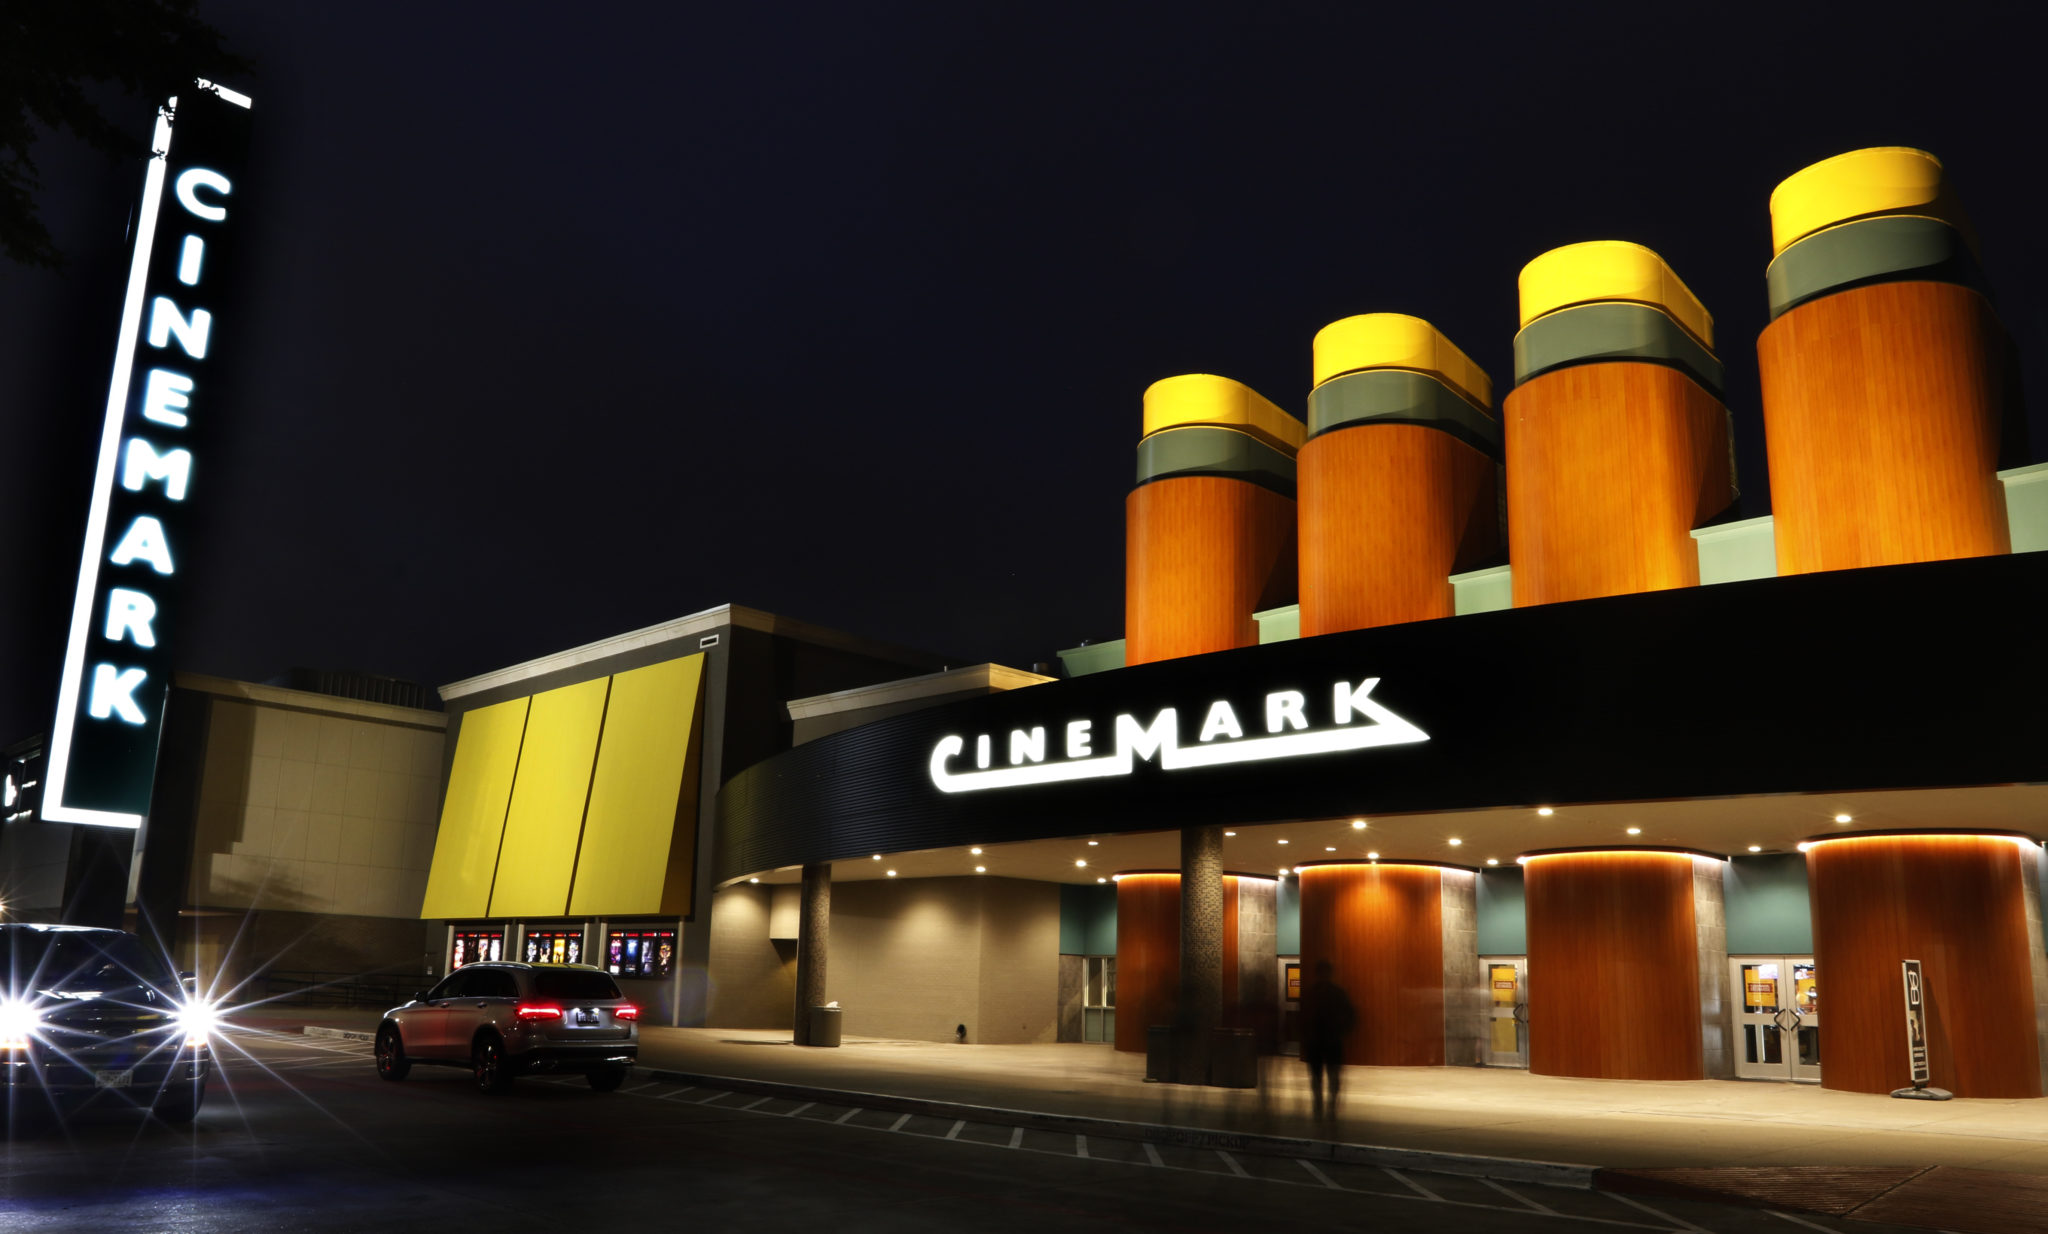 Cinemark Announces Enhanced Cleaning and Sanitation Protocols, Discount